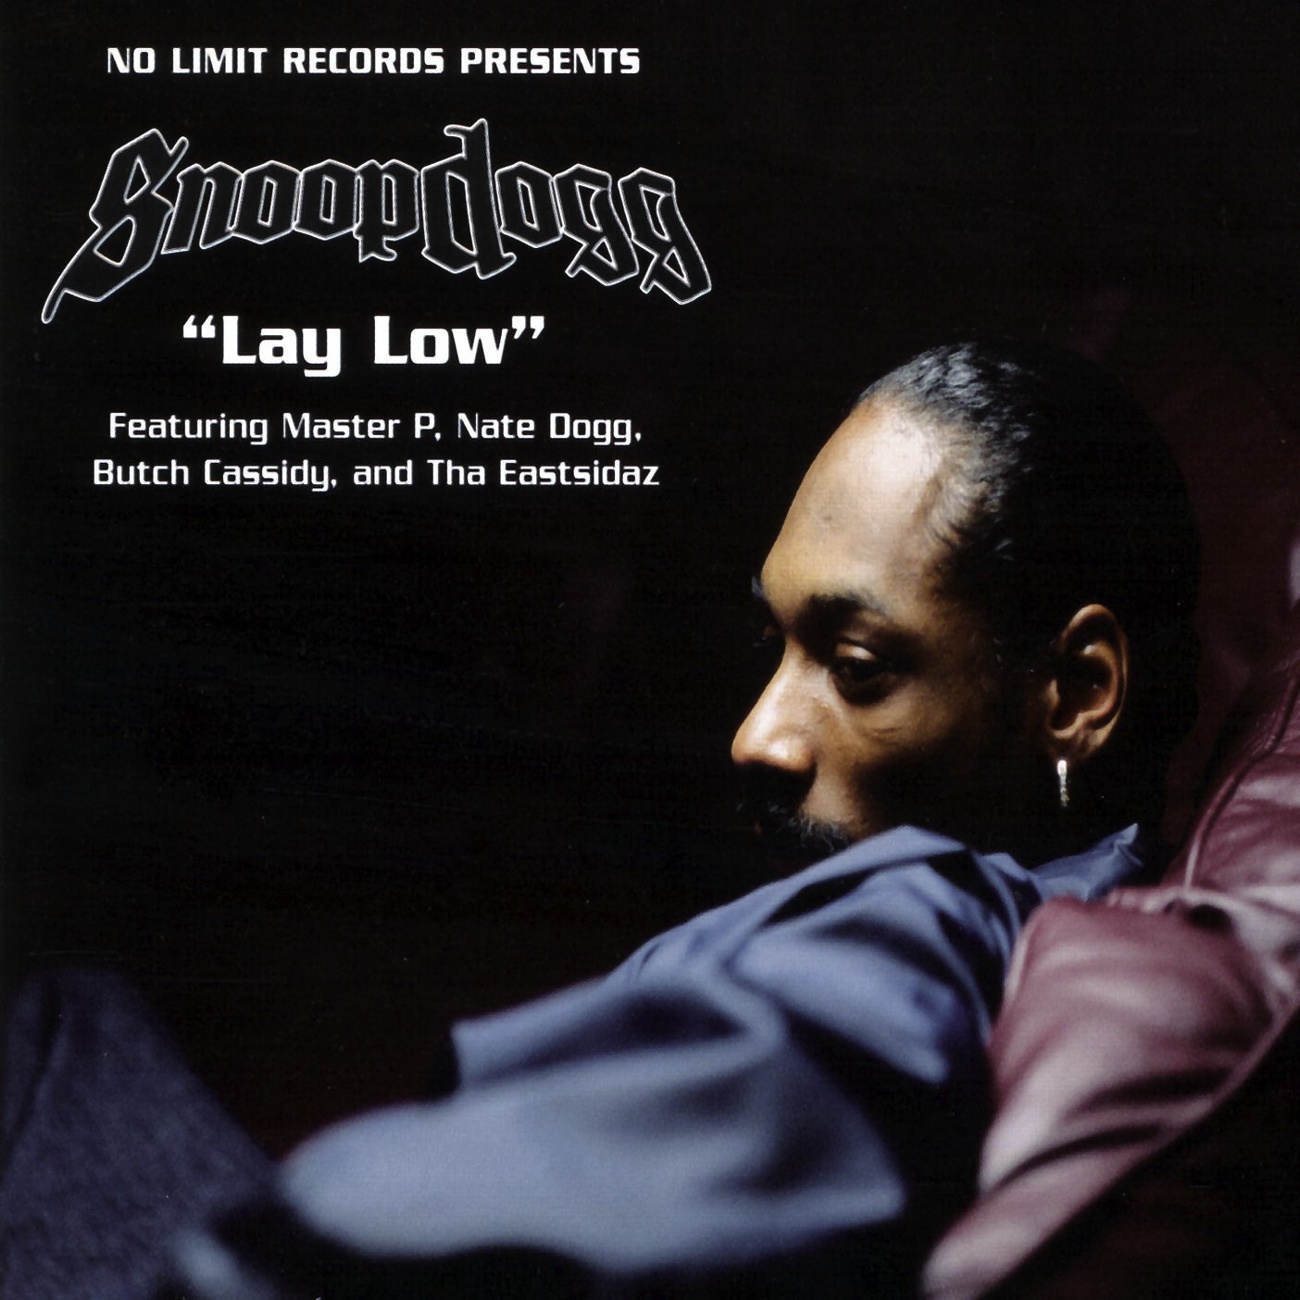 Lay Low (feat. Master P, Nate Dogg, Butch Cassidy and Tha Eastsidaz)